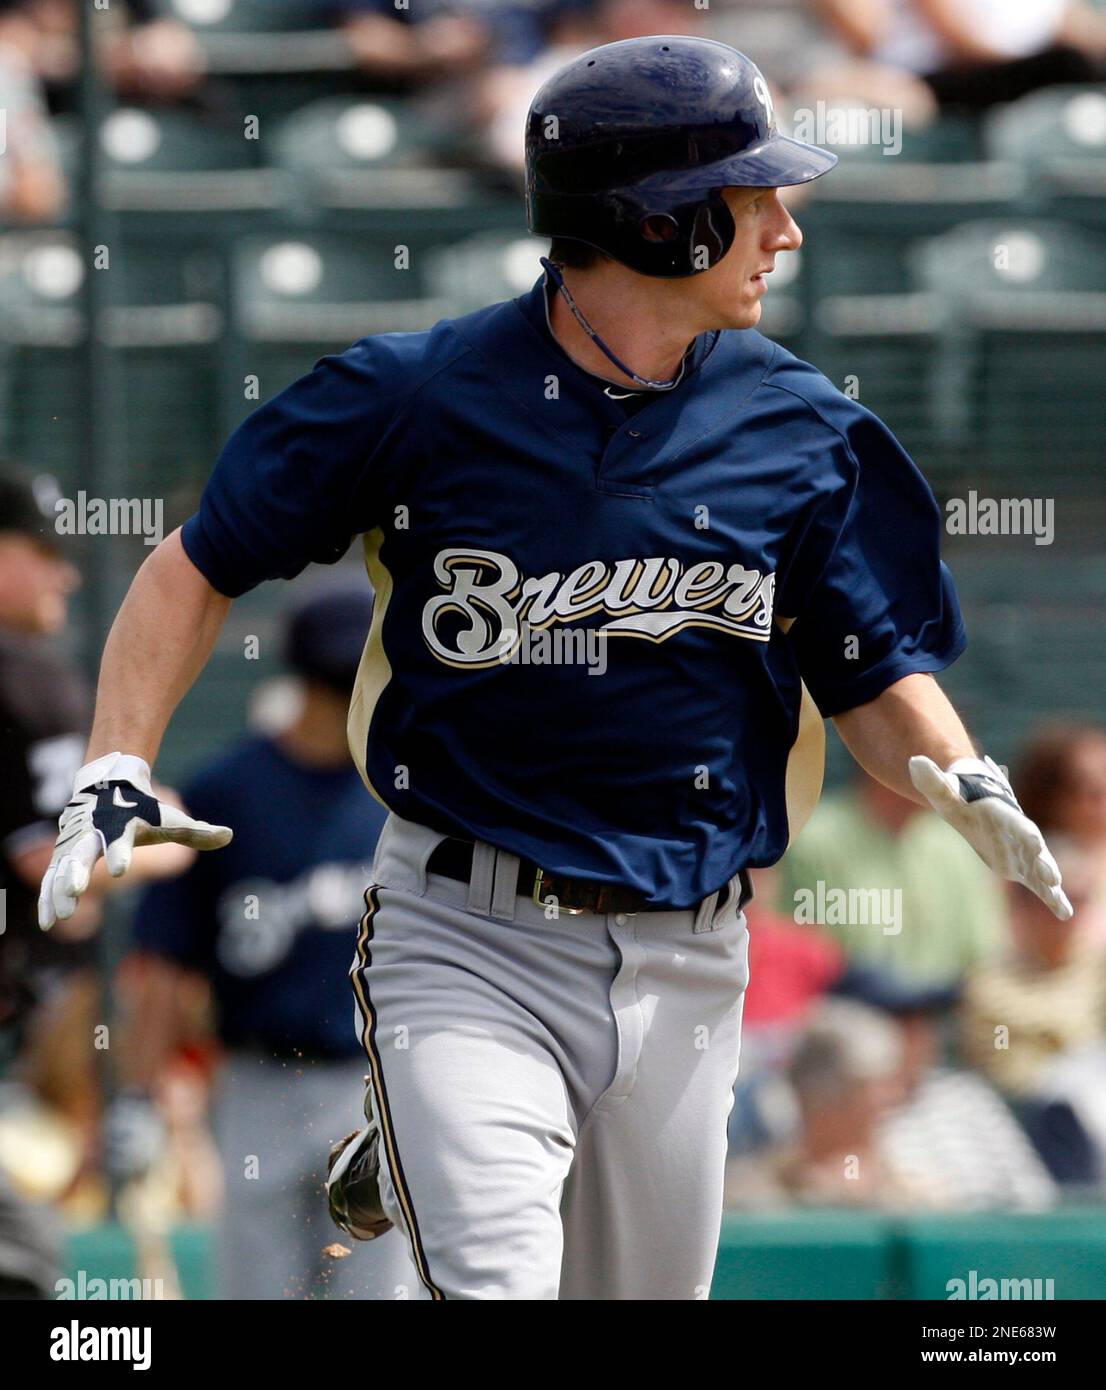 Milwaukee Native Counsell Got His Start With Rockies